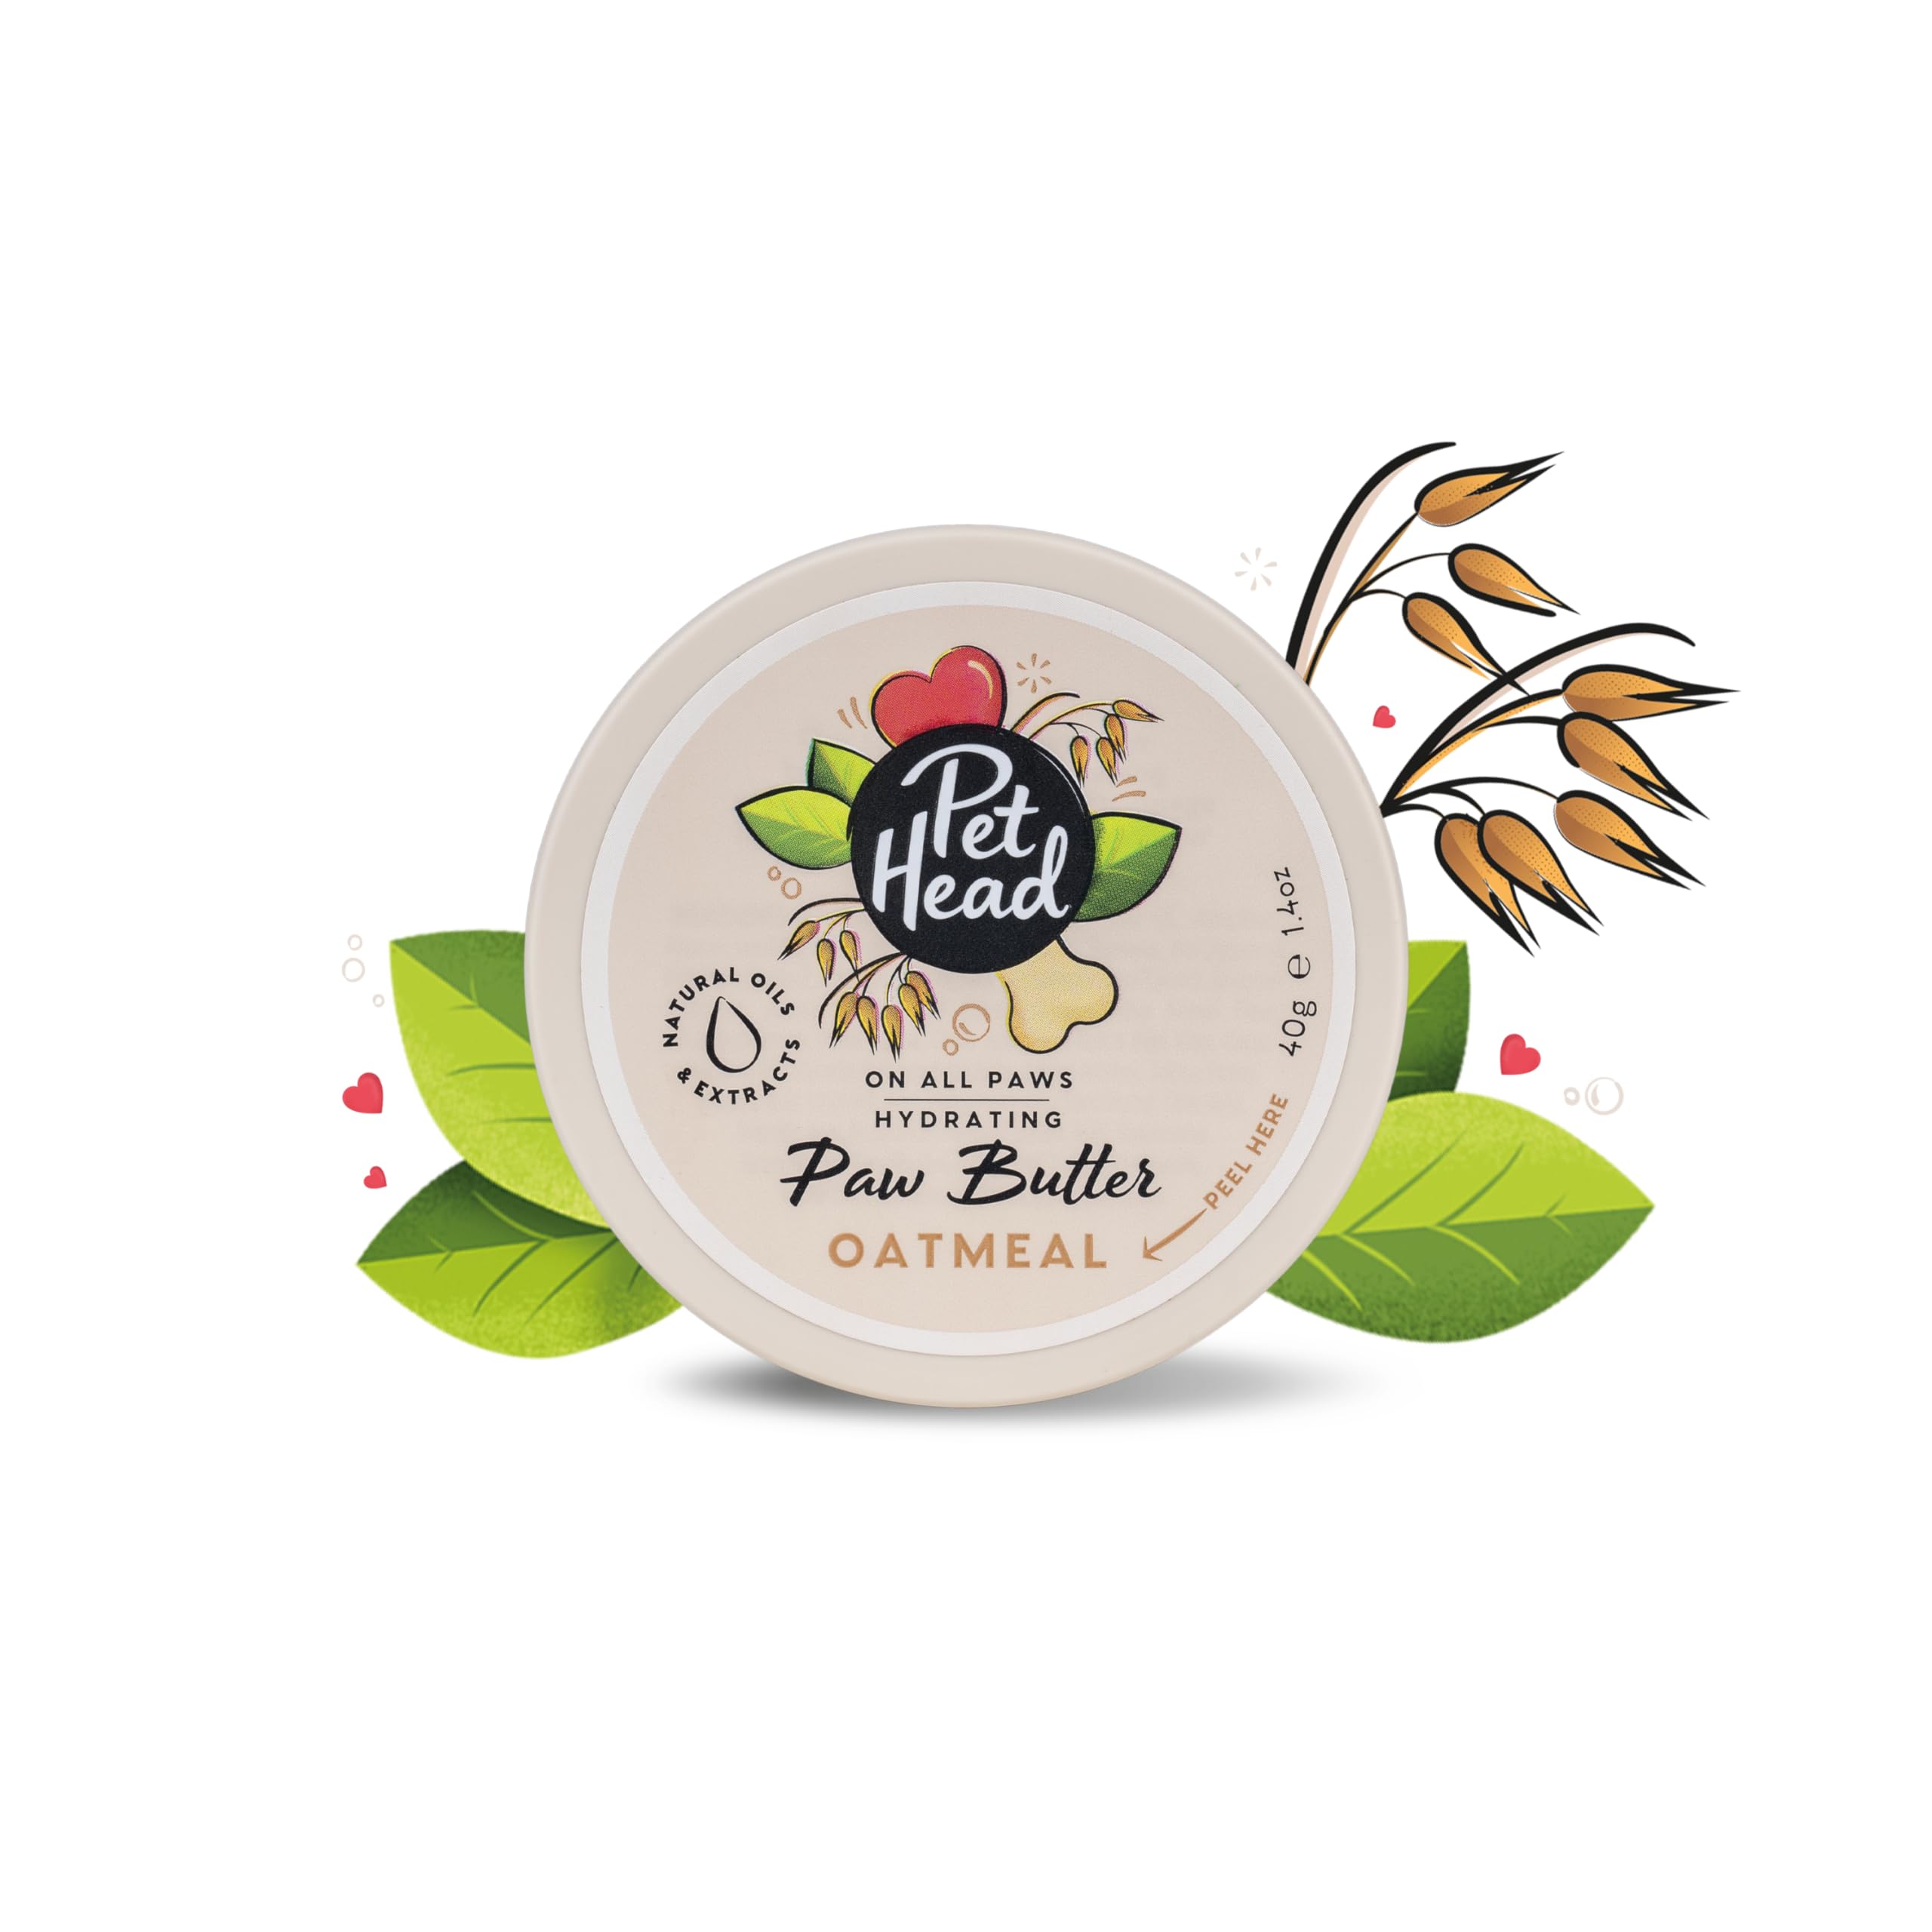 PET Head On All Paws Oatmeal Paw Butter 1.4 oz. Nourishing Paw Balm, Moisturizes Paws and Noses to Leave Them Soft and Crack-Free, Lickable, Gentle Formula for Puppies. Made in USA